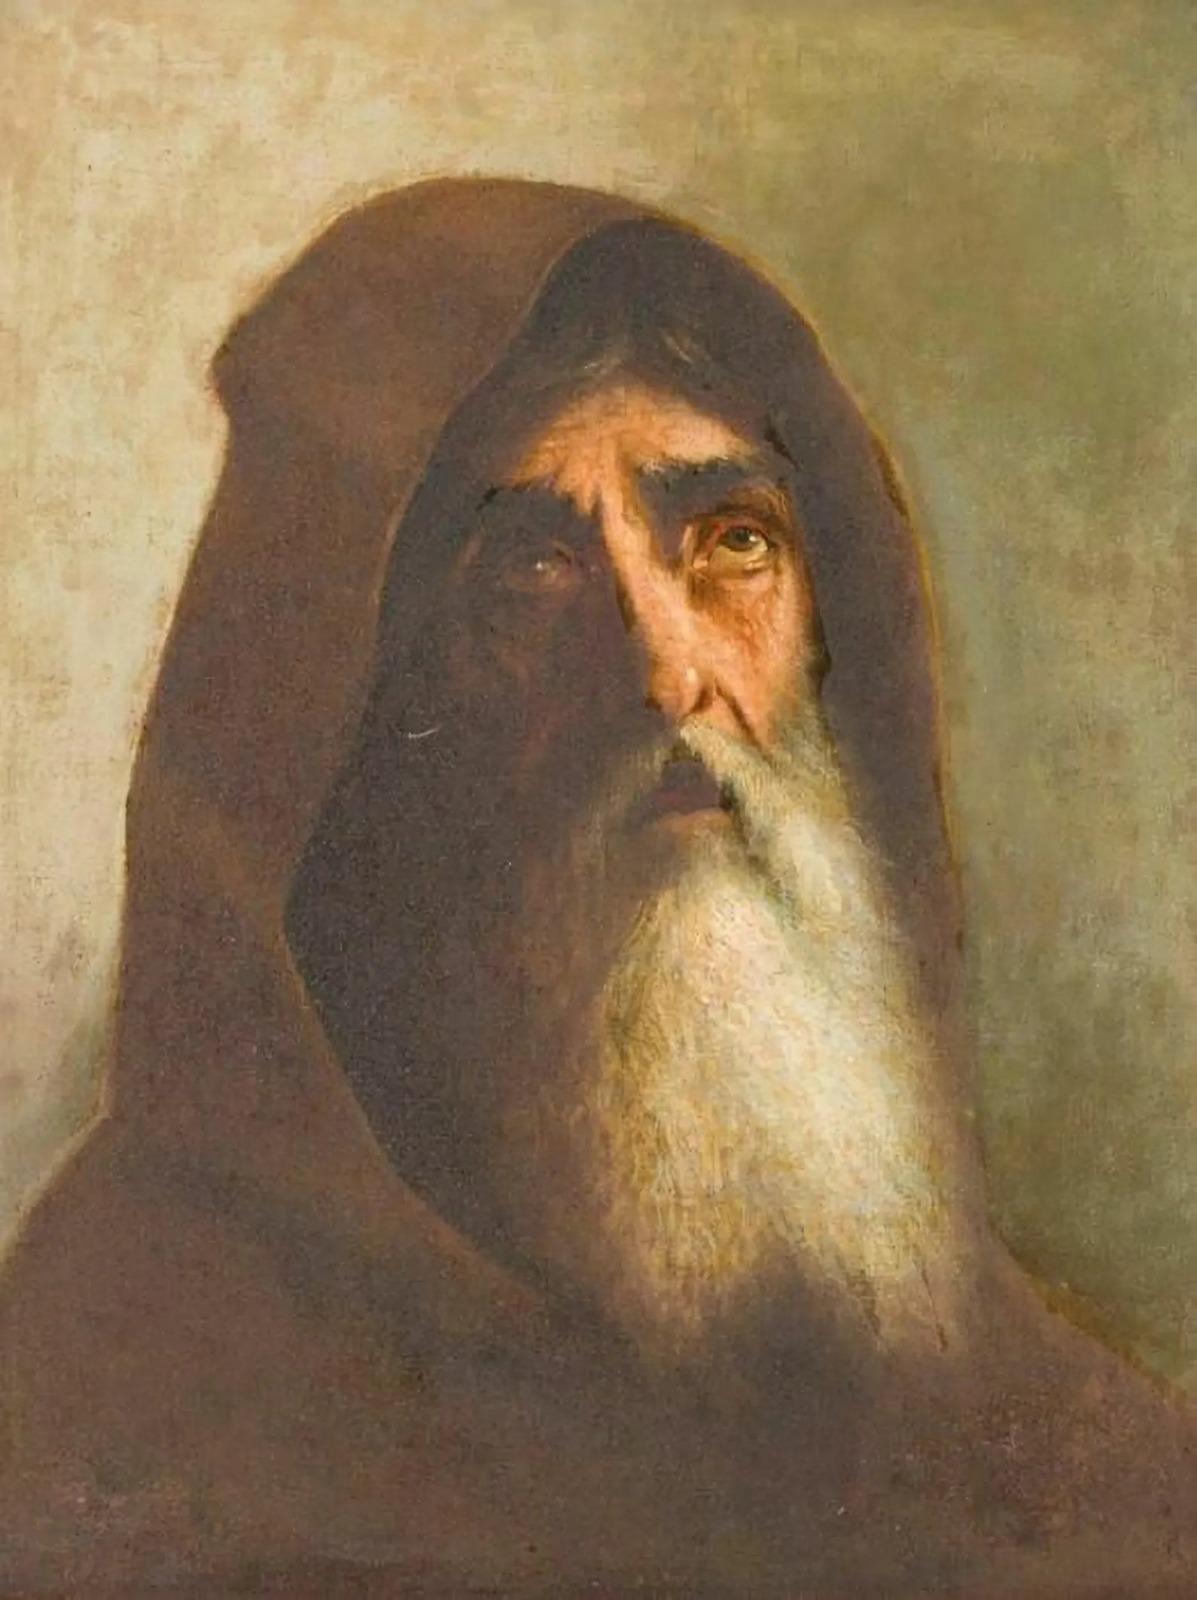 Title: Saint Francis of Padova
Date/Period: 17th century
Dimension: 52cm x 41cm without frame - 72cm x 61cm with frame
Materials: Oil on canvas
Additional Information: Italian school, 17th century, Follower of José de Ribera. Italian private